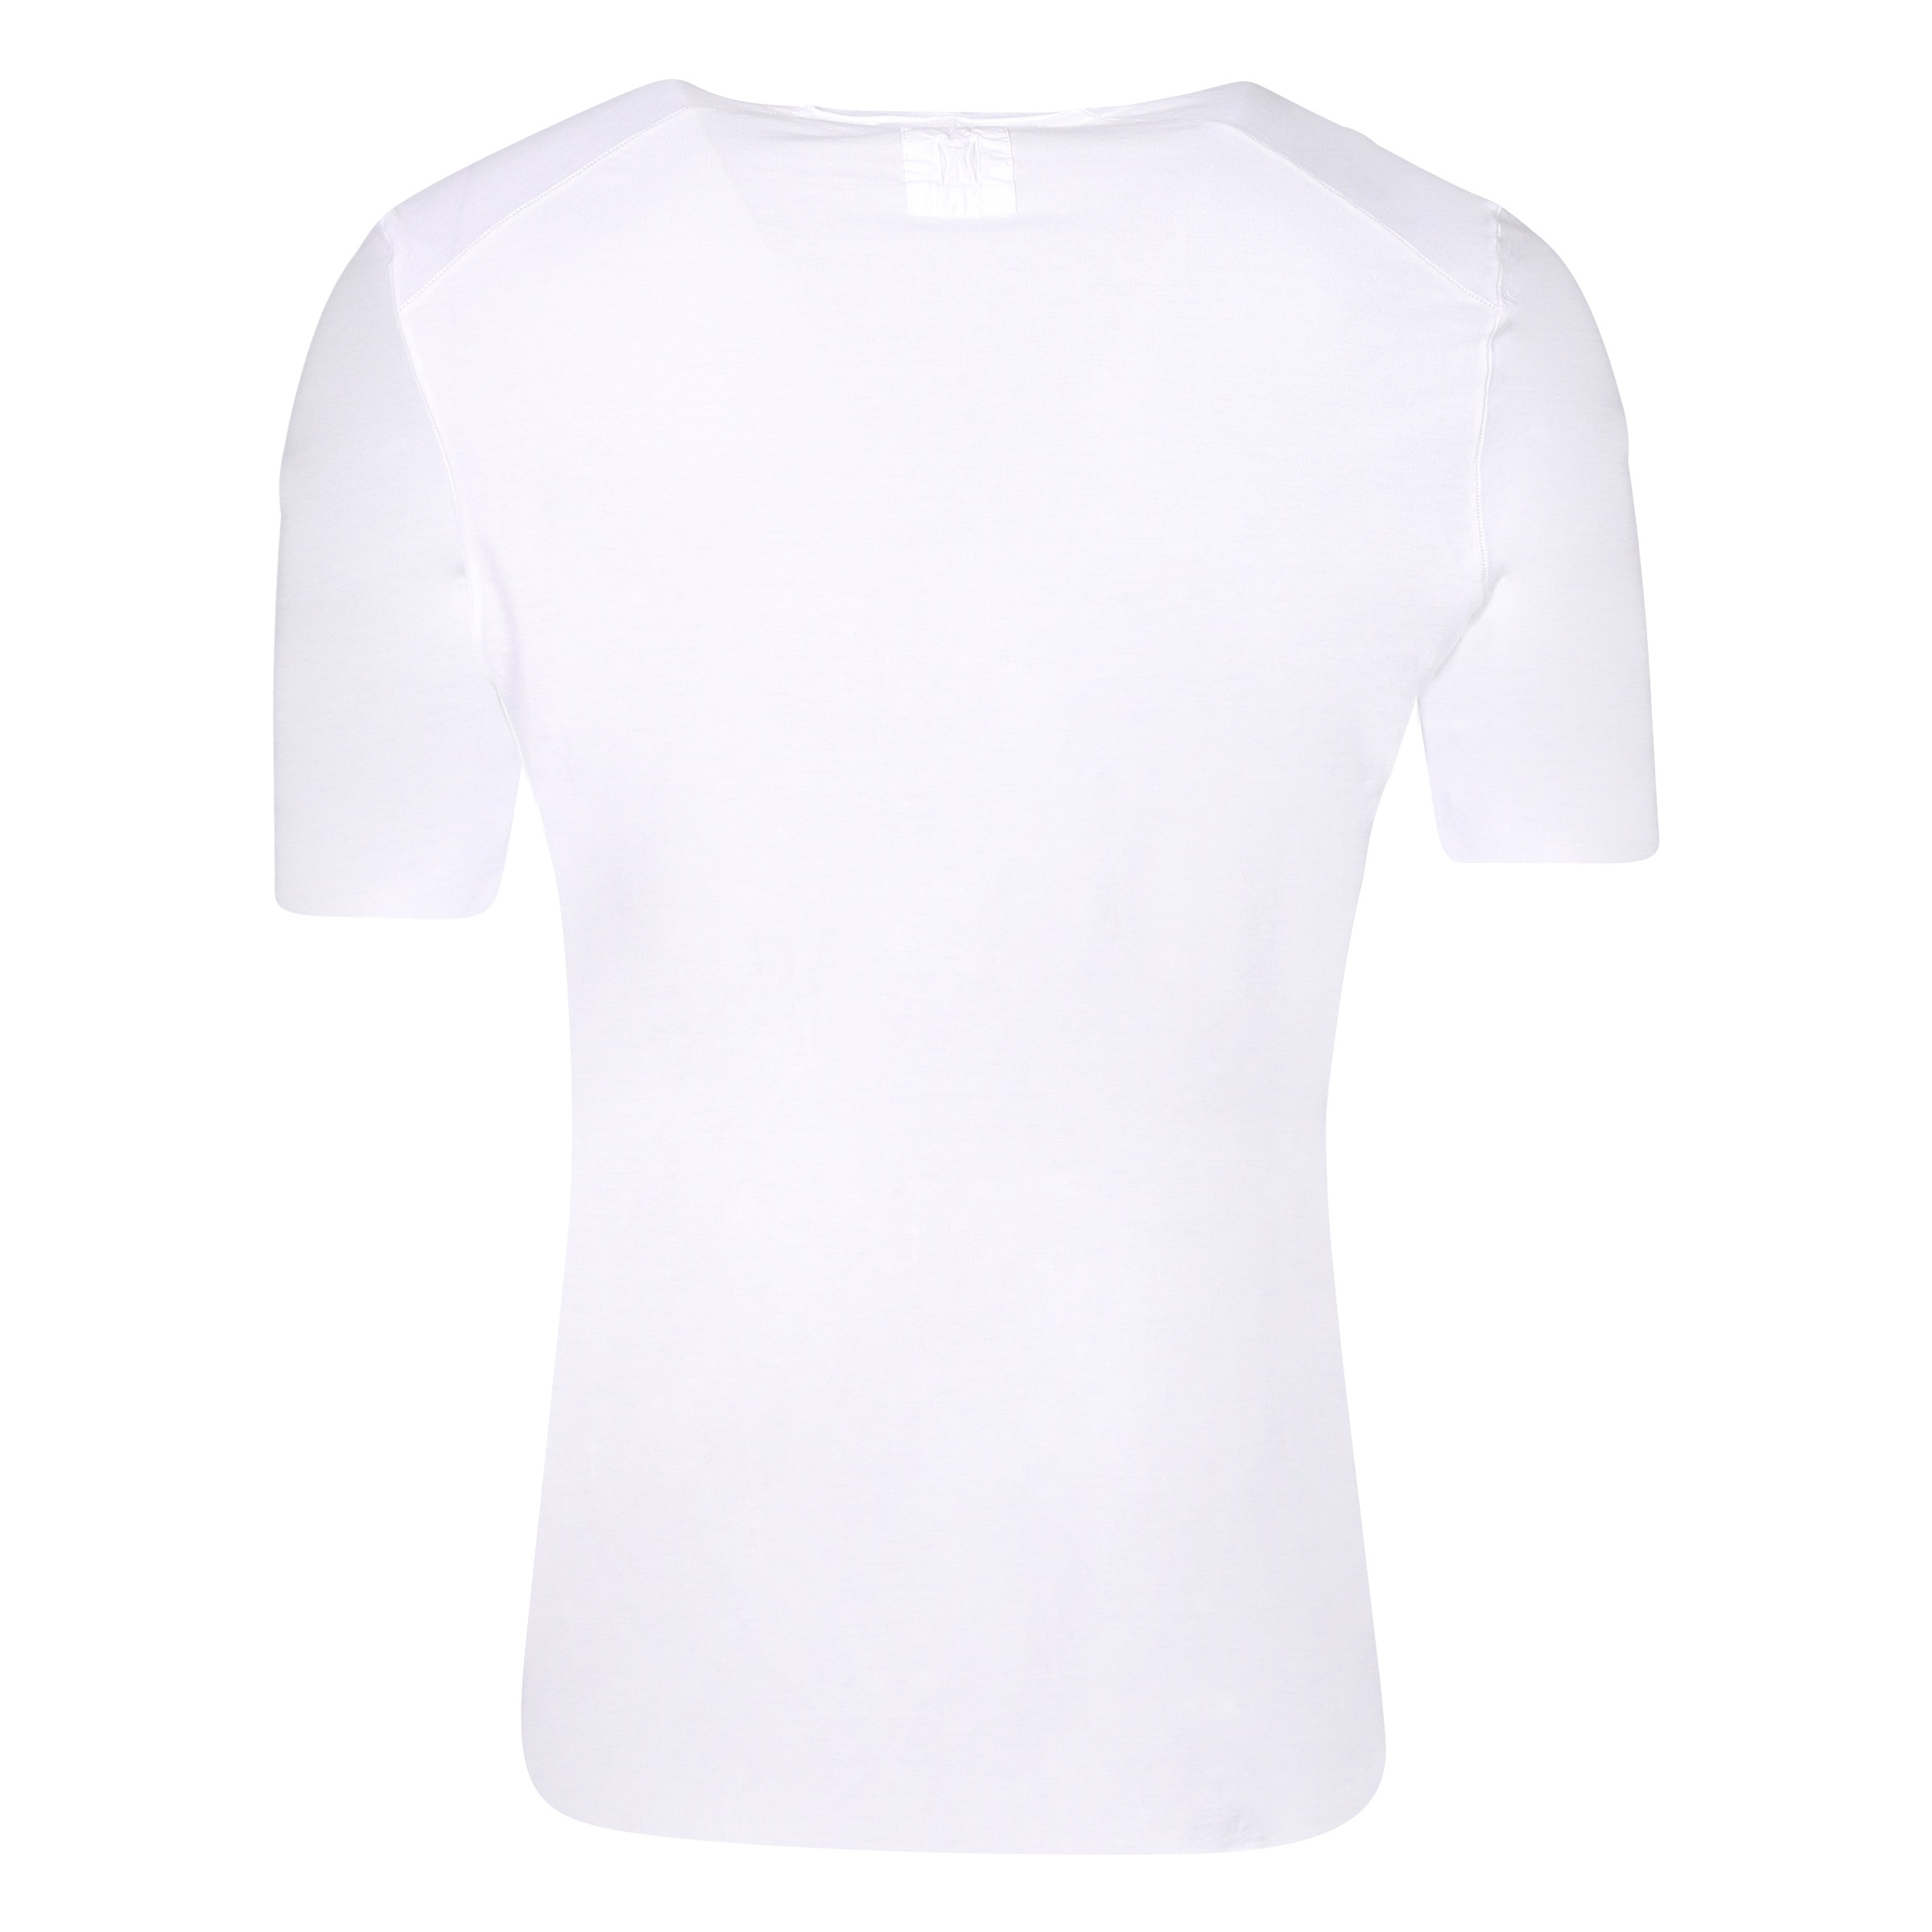 Hannes Roether V-Neck T-Shirt in White XXL